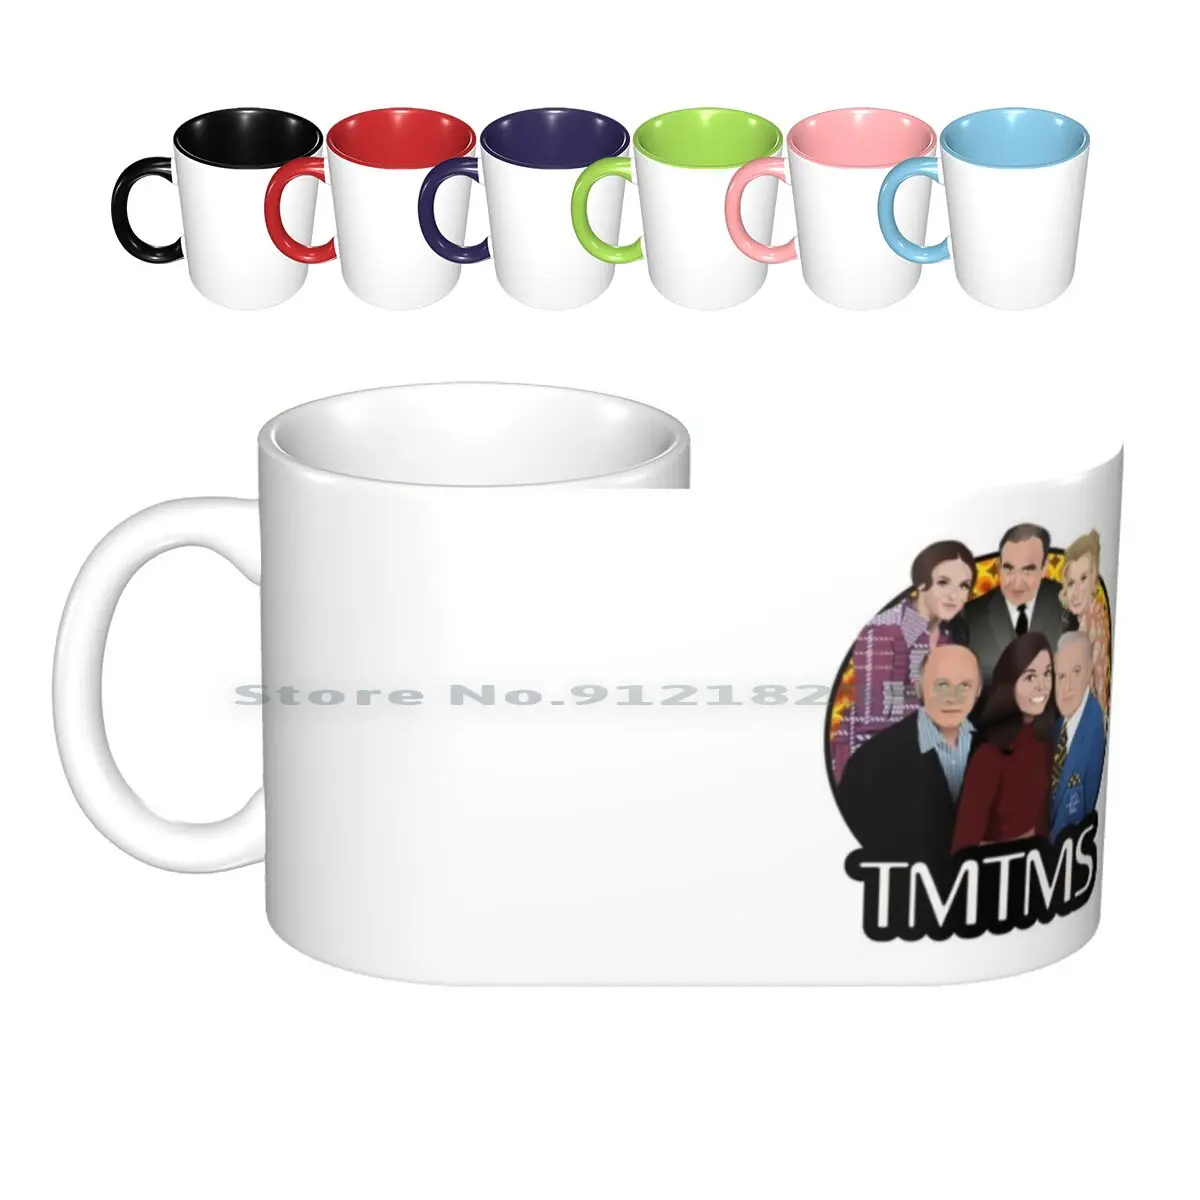 

Mary Tyler Moore Show Ceramic Mugs Coffee Cups Milk Tea Mug The Mary Tyler Moore Show Mary Tyler Moore Mary Richards Mtm Tmtms